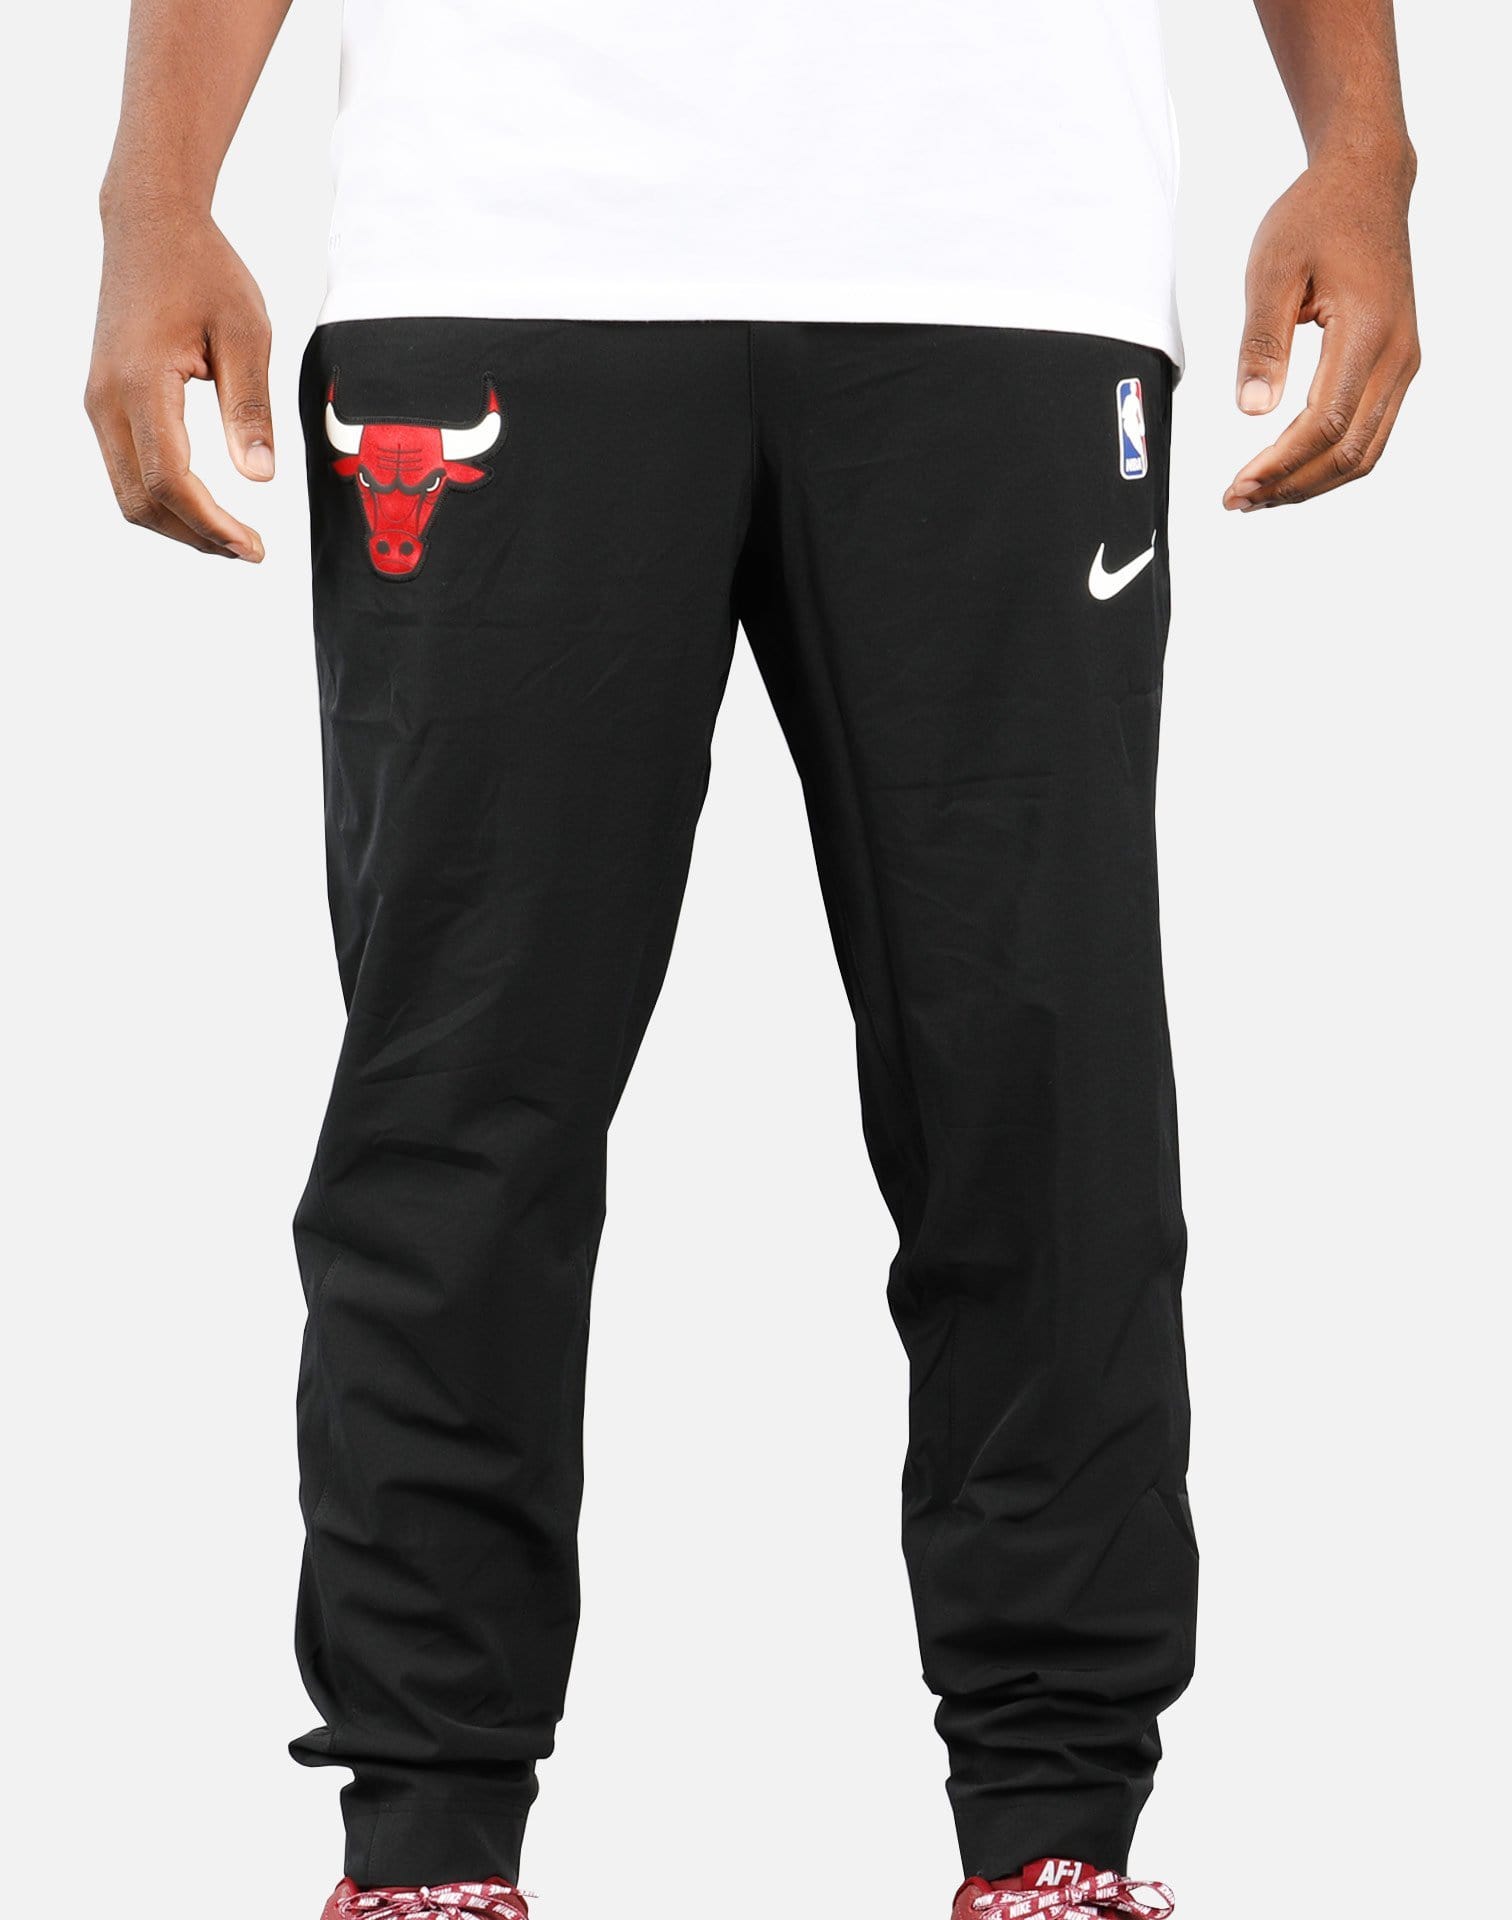 Chicago Bulls Nike 2023/24 Authentic Showtime Performance Pants - Red/Black